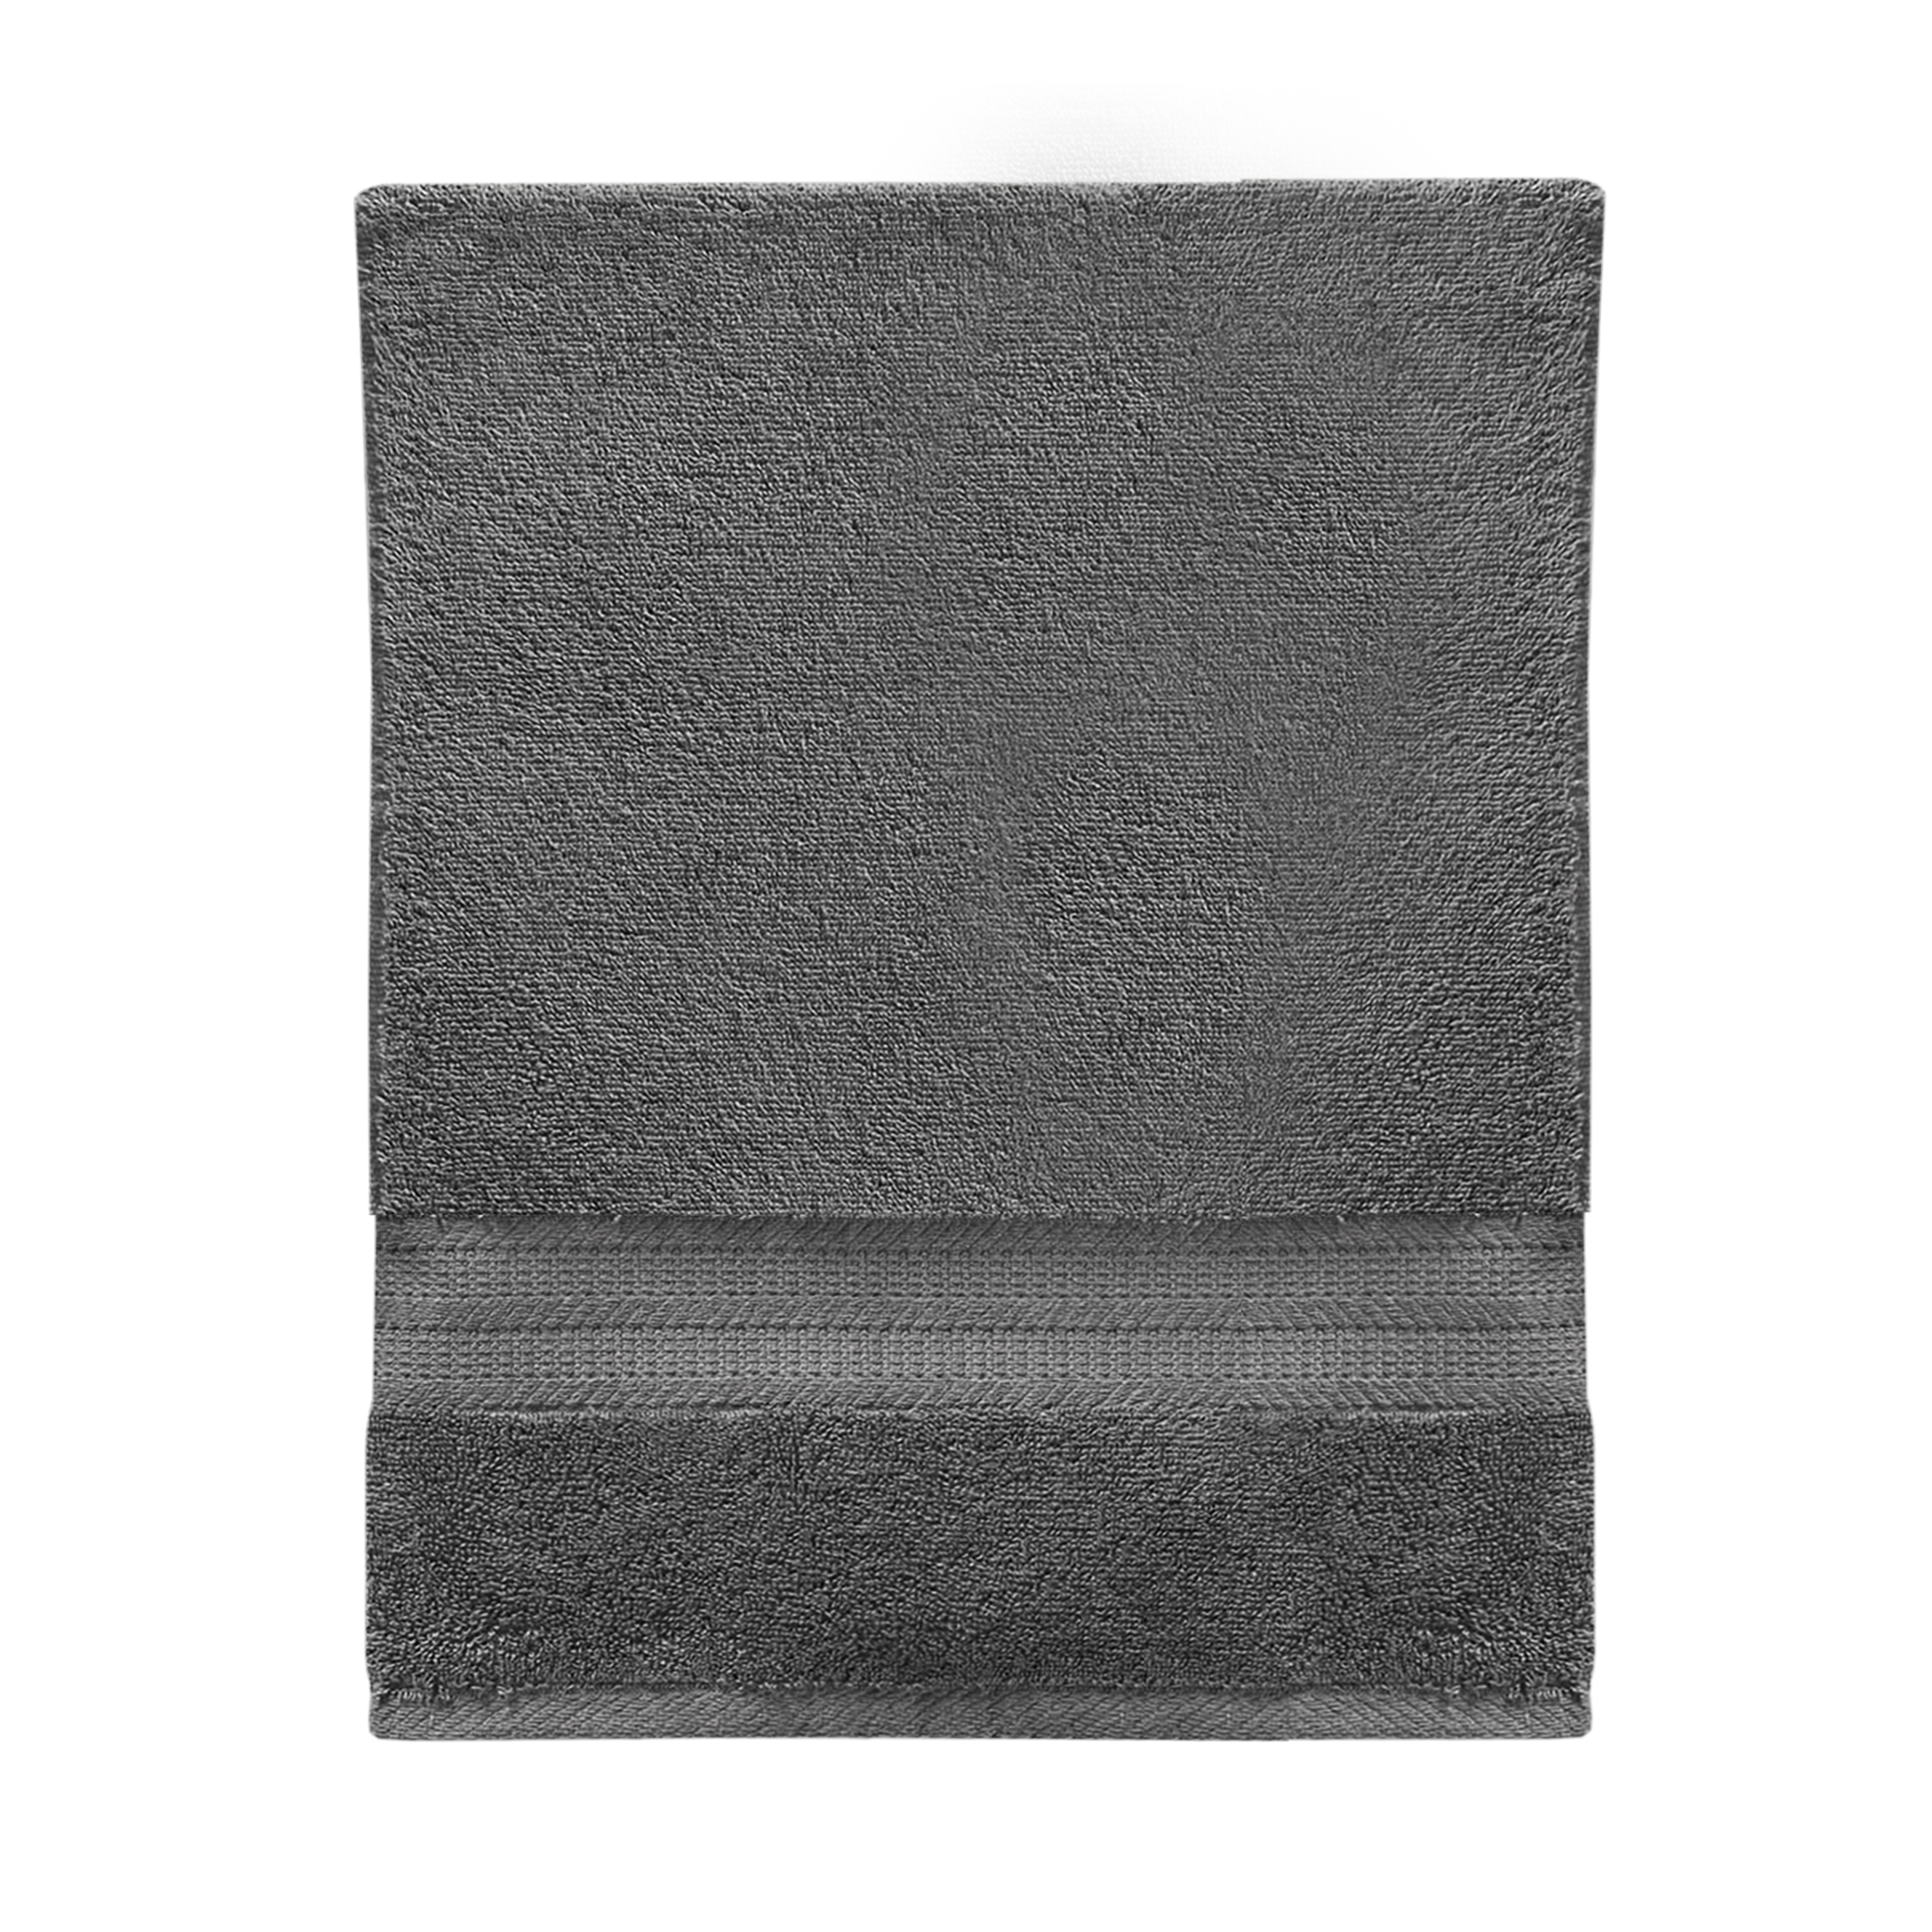 Better Homes & Gardens Adult Bath Towel, Solid Grey - image 4 of 9